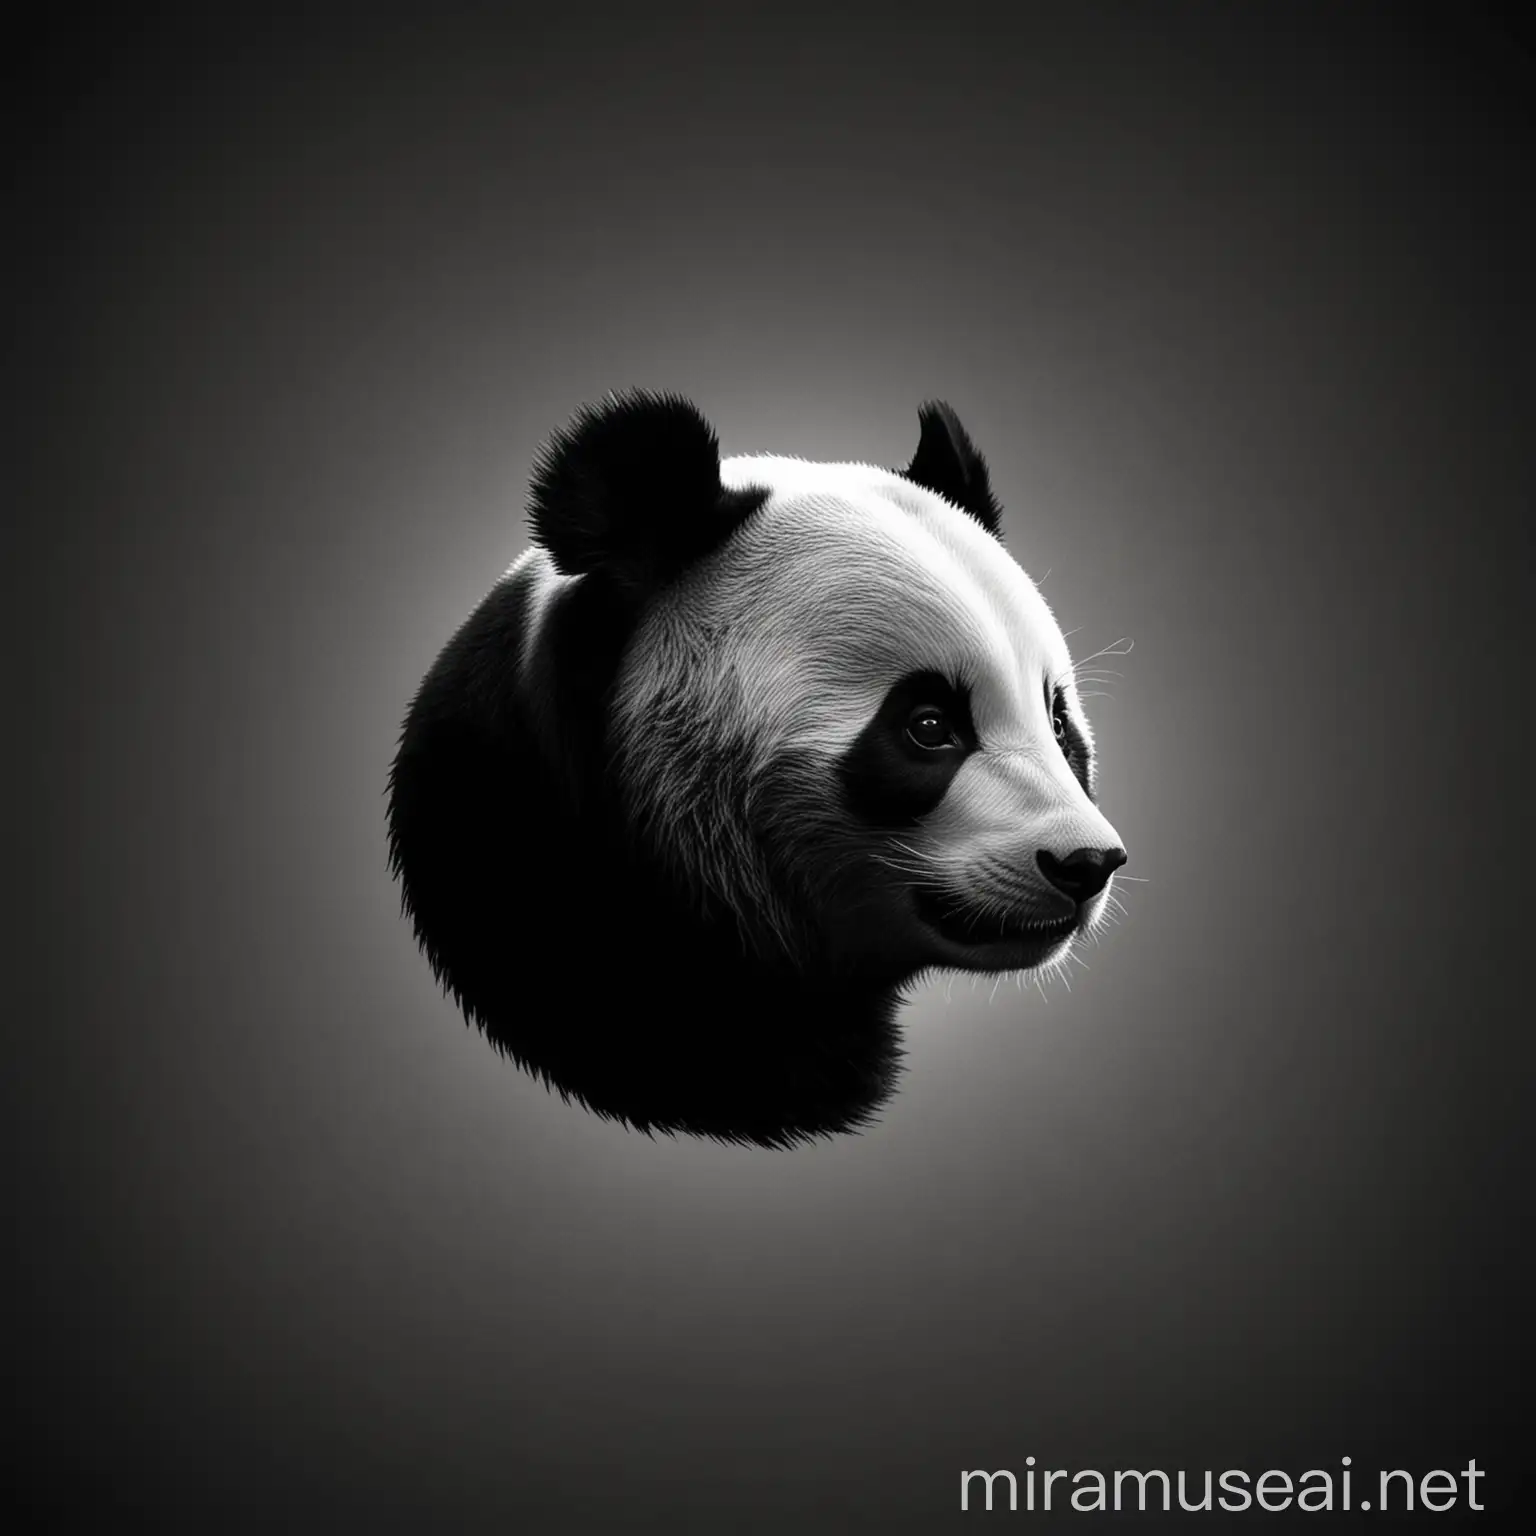 pure black panda abstract shadow aesthetic good for adding elements 